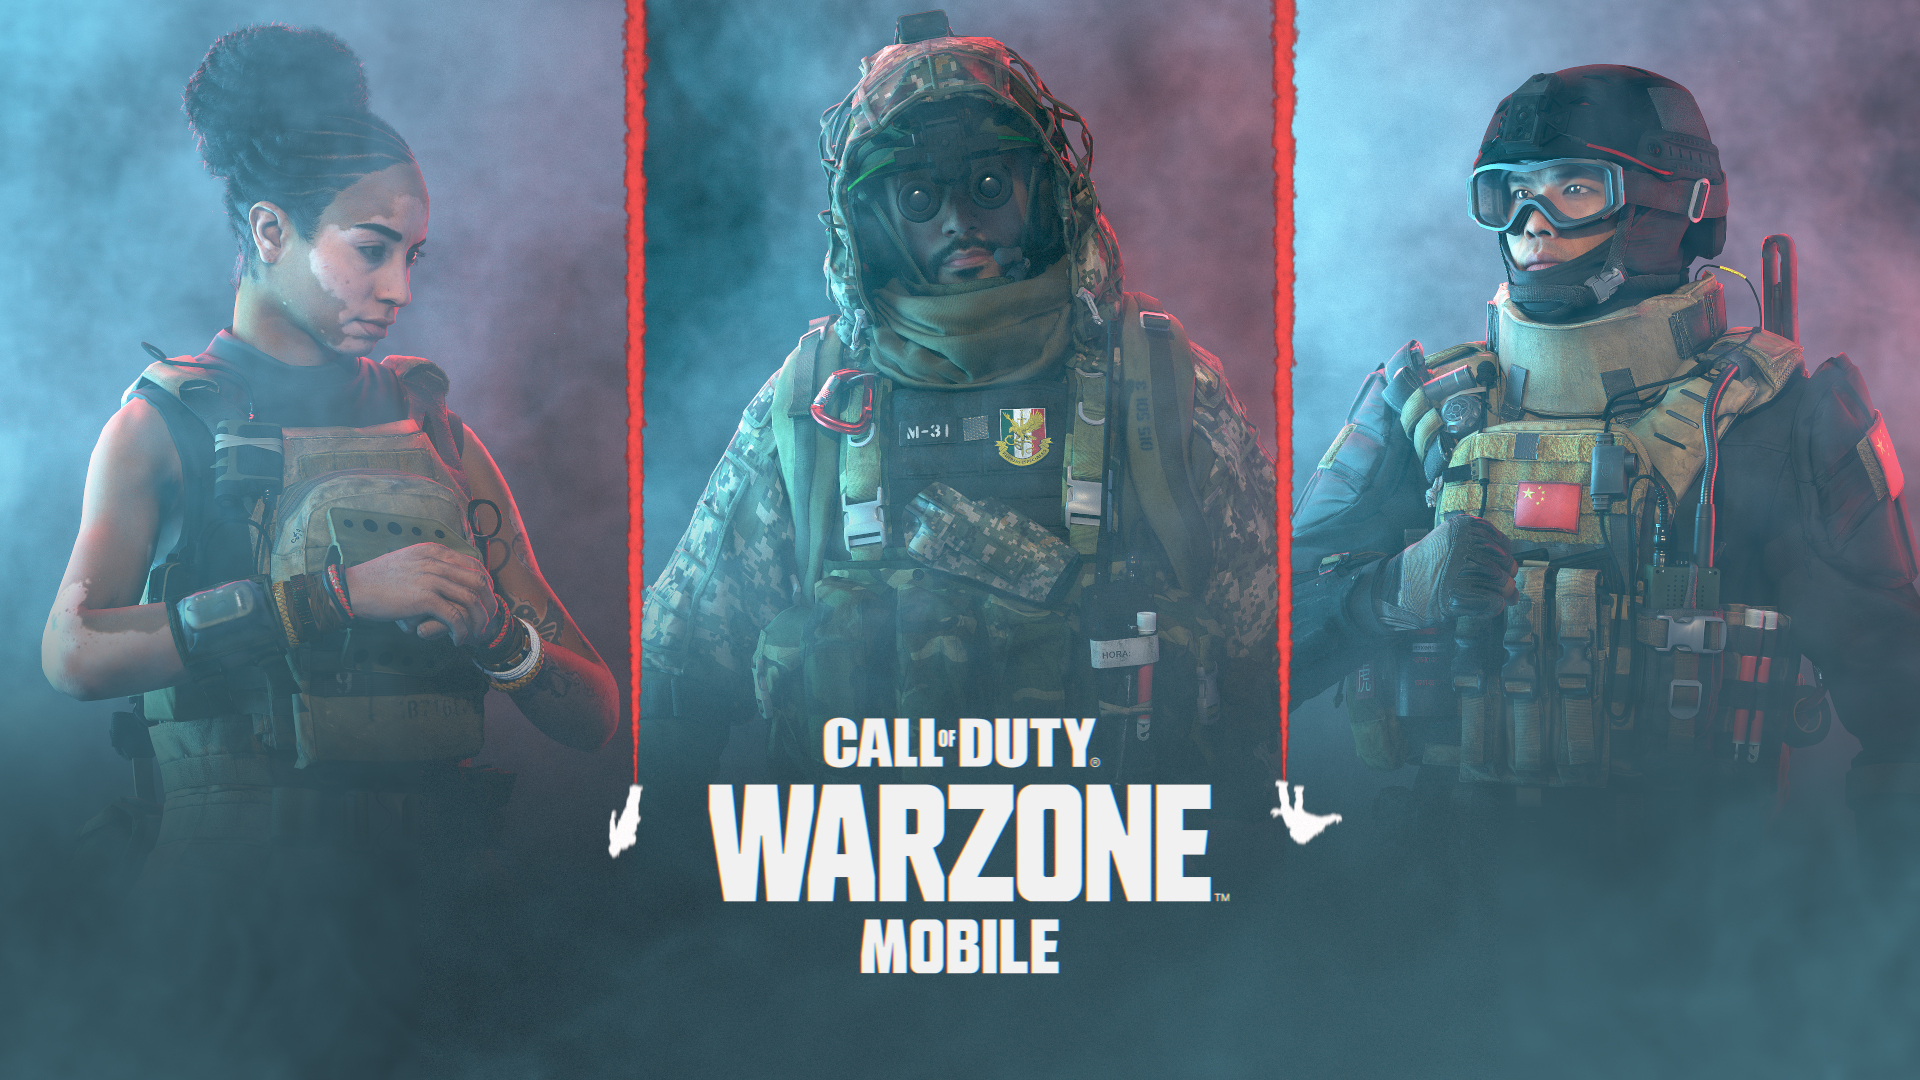 Will Call of Duty: Warzone Mobile have emulator support?